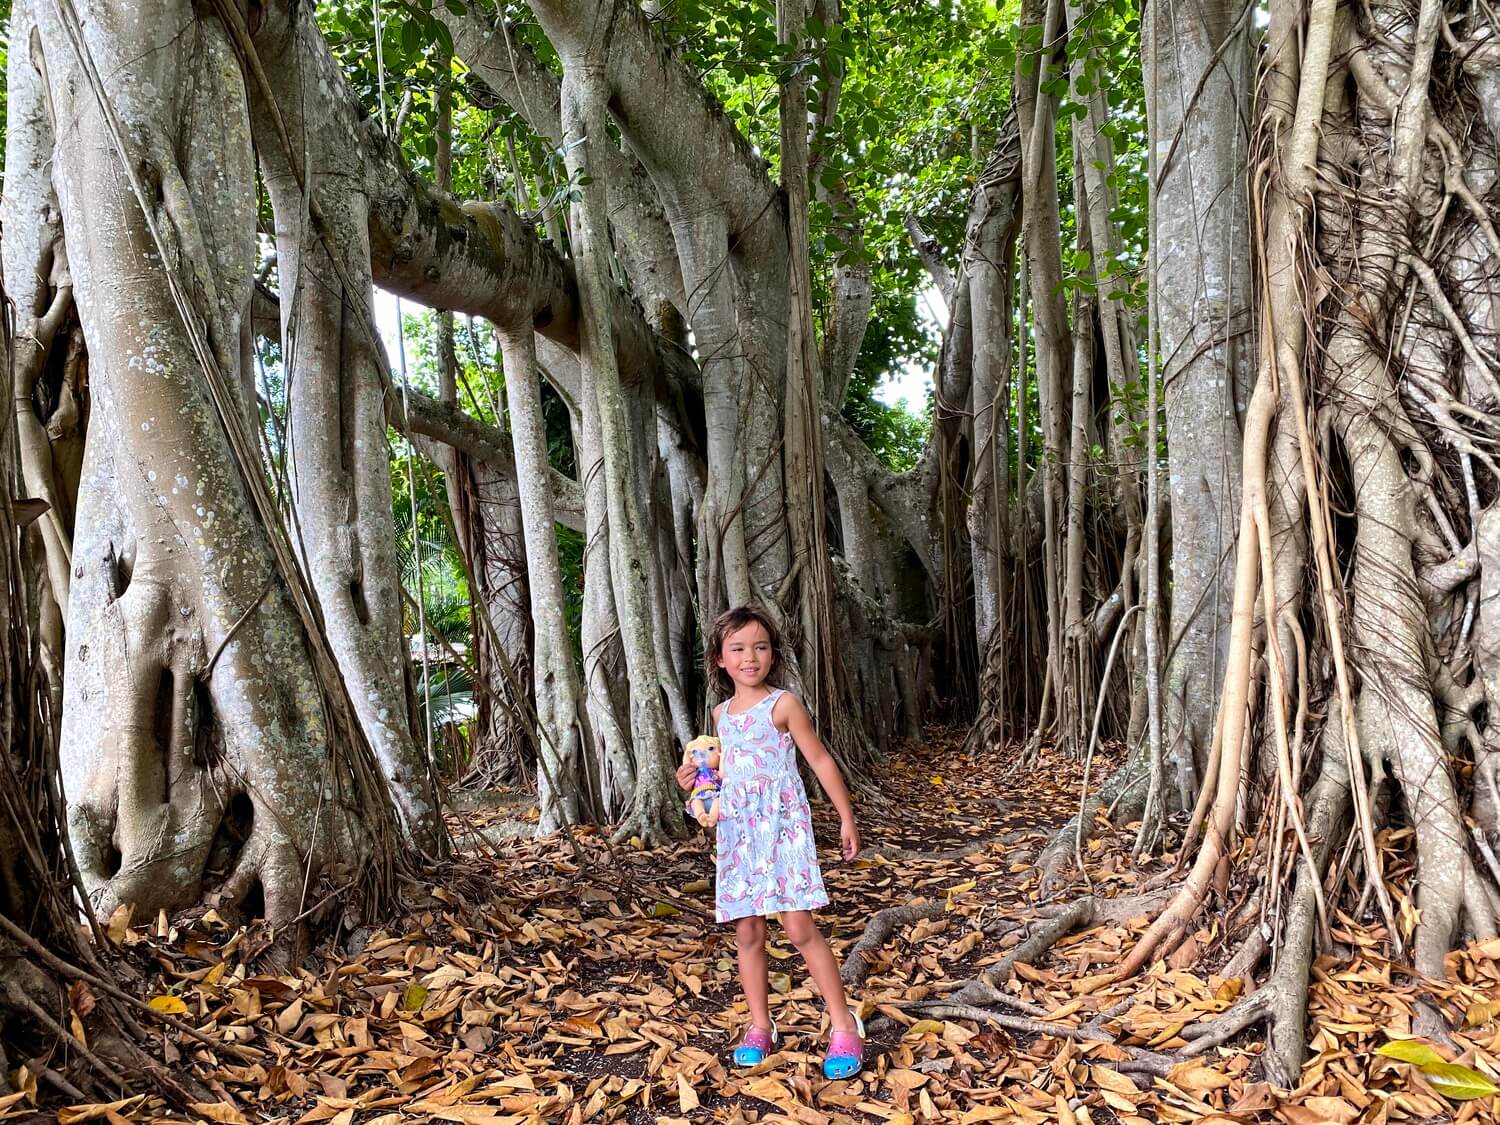 Elyse in a banyan tree forest